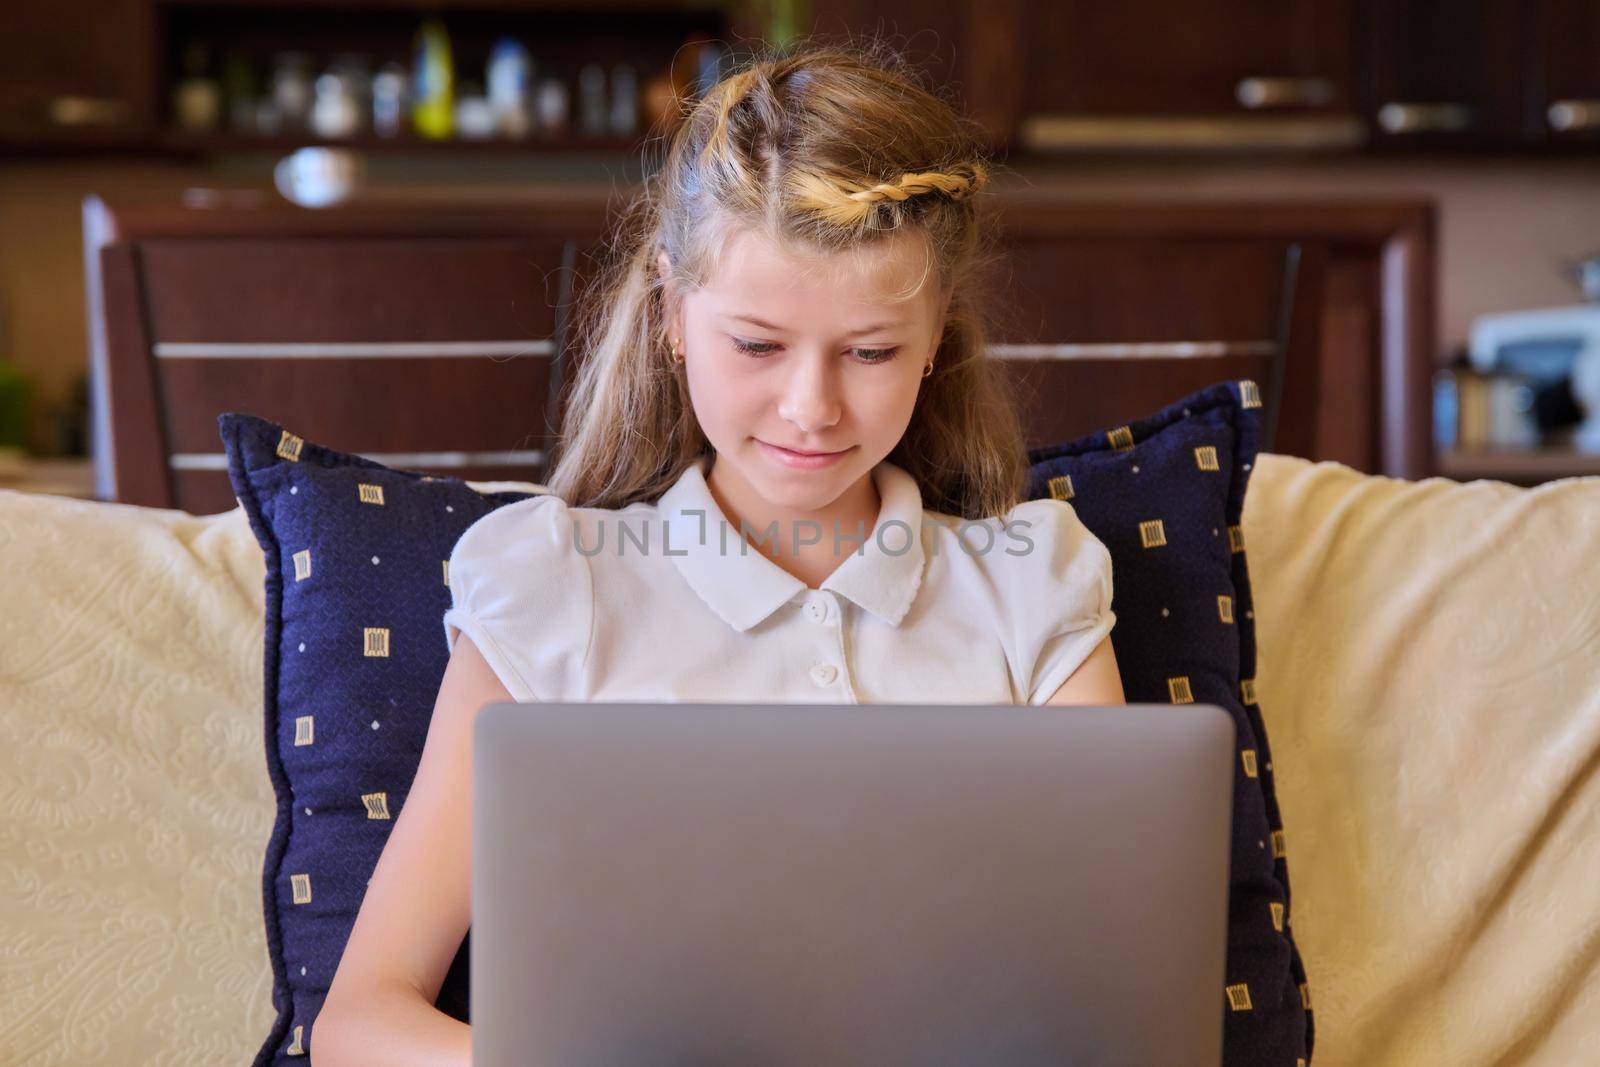 Child girl with laptop at home on the couch. Preteen blonde girl looking at laptop screen, education, relaxation, leisure, computer game, video communication, home lifestyle